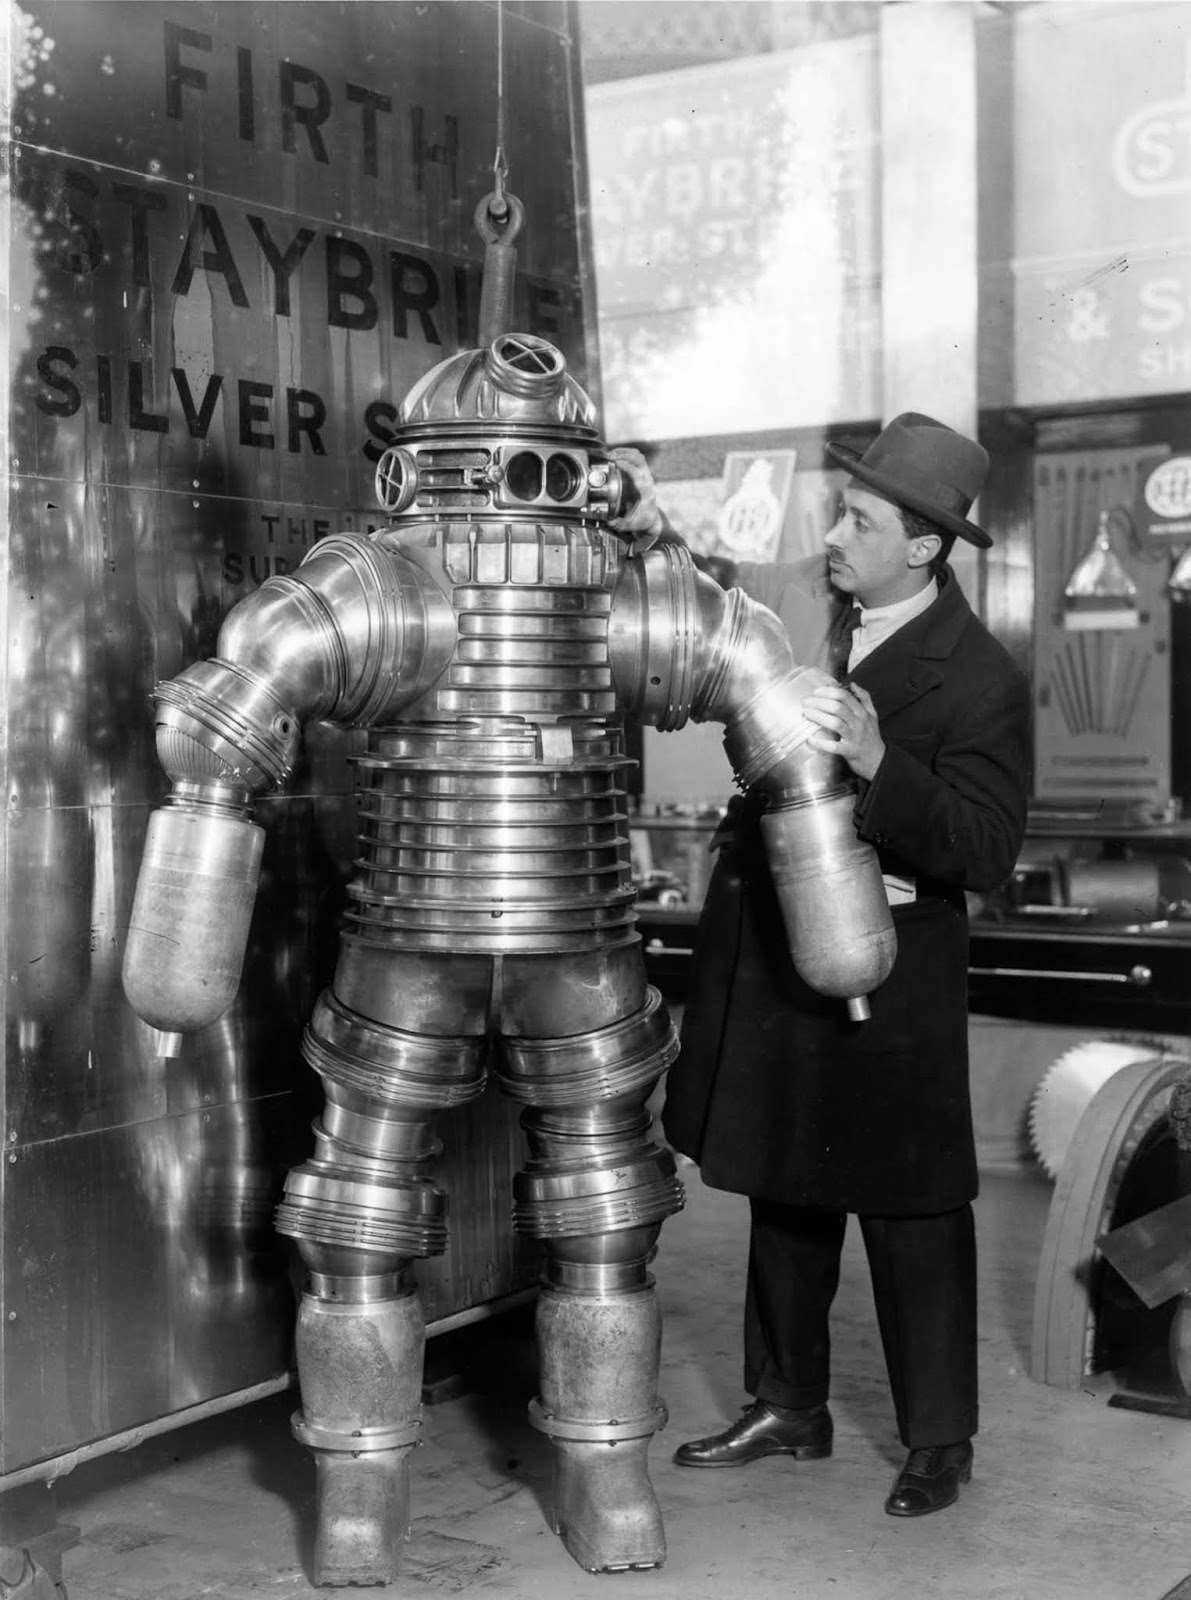 Inventor J. S. Peress explains the workings of his new rustless diving suit, made of Staybrite Silver Steel, at the Olympia Shipping Exhibition in London.